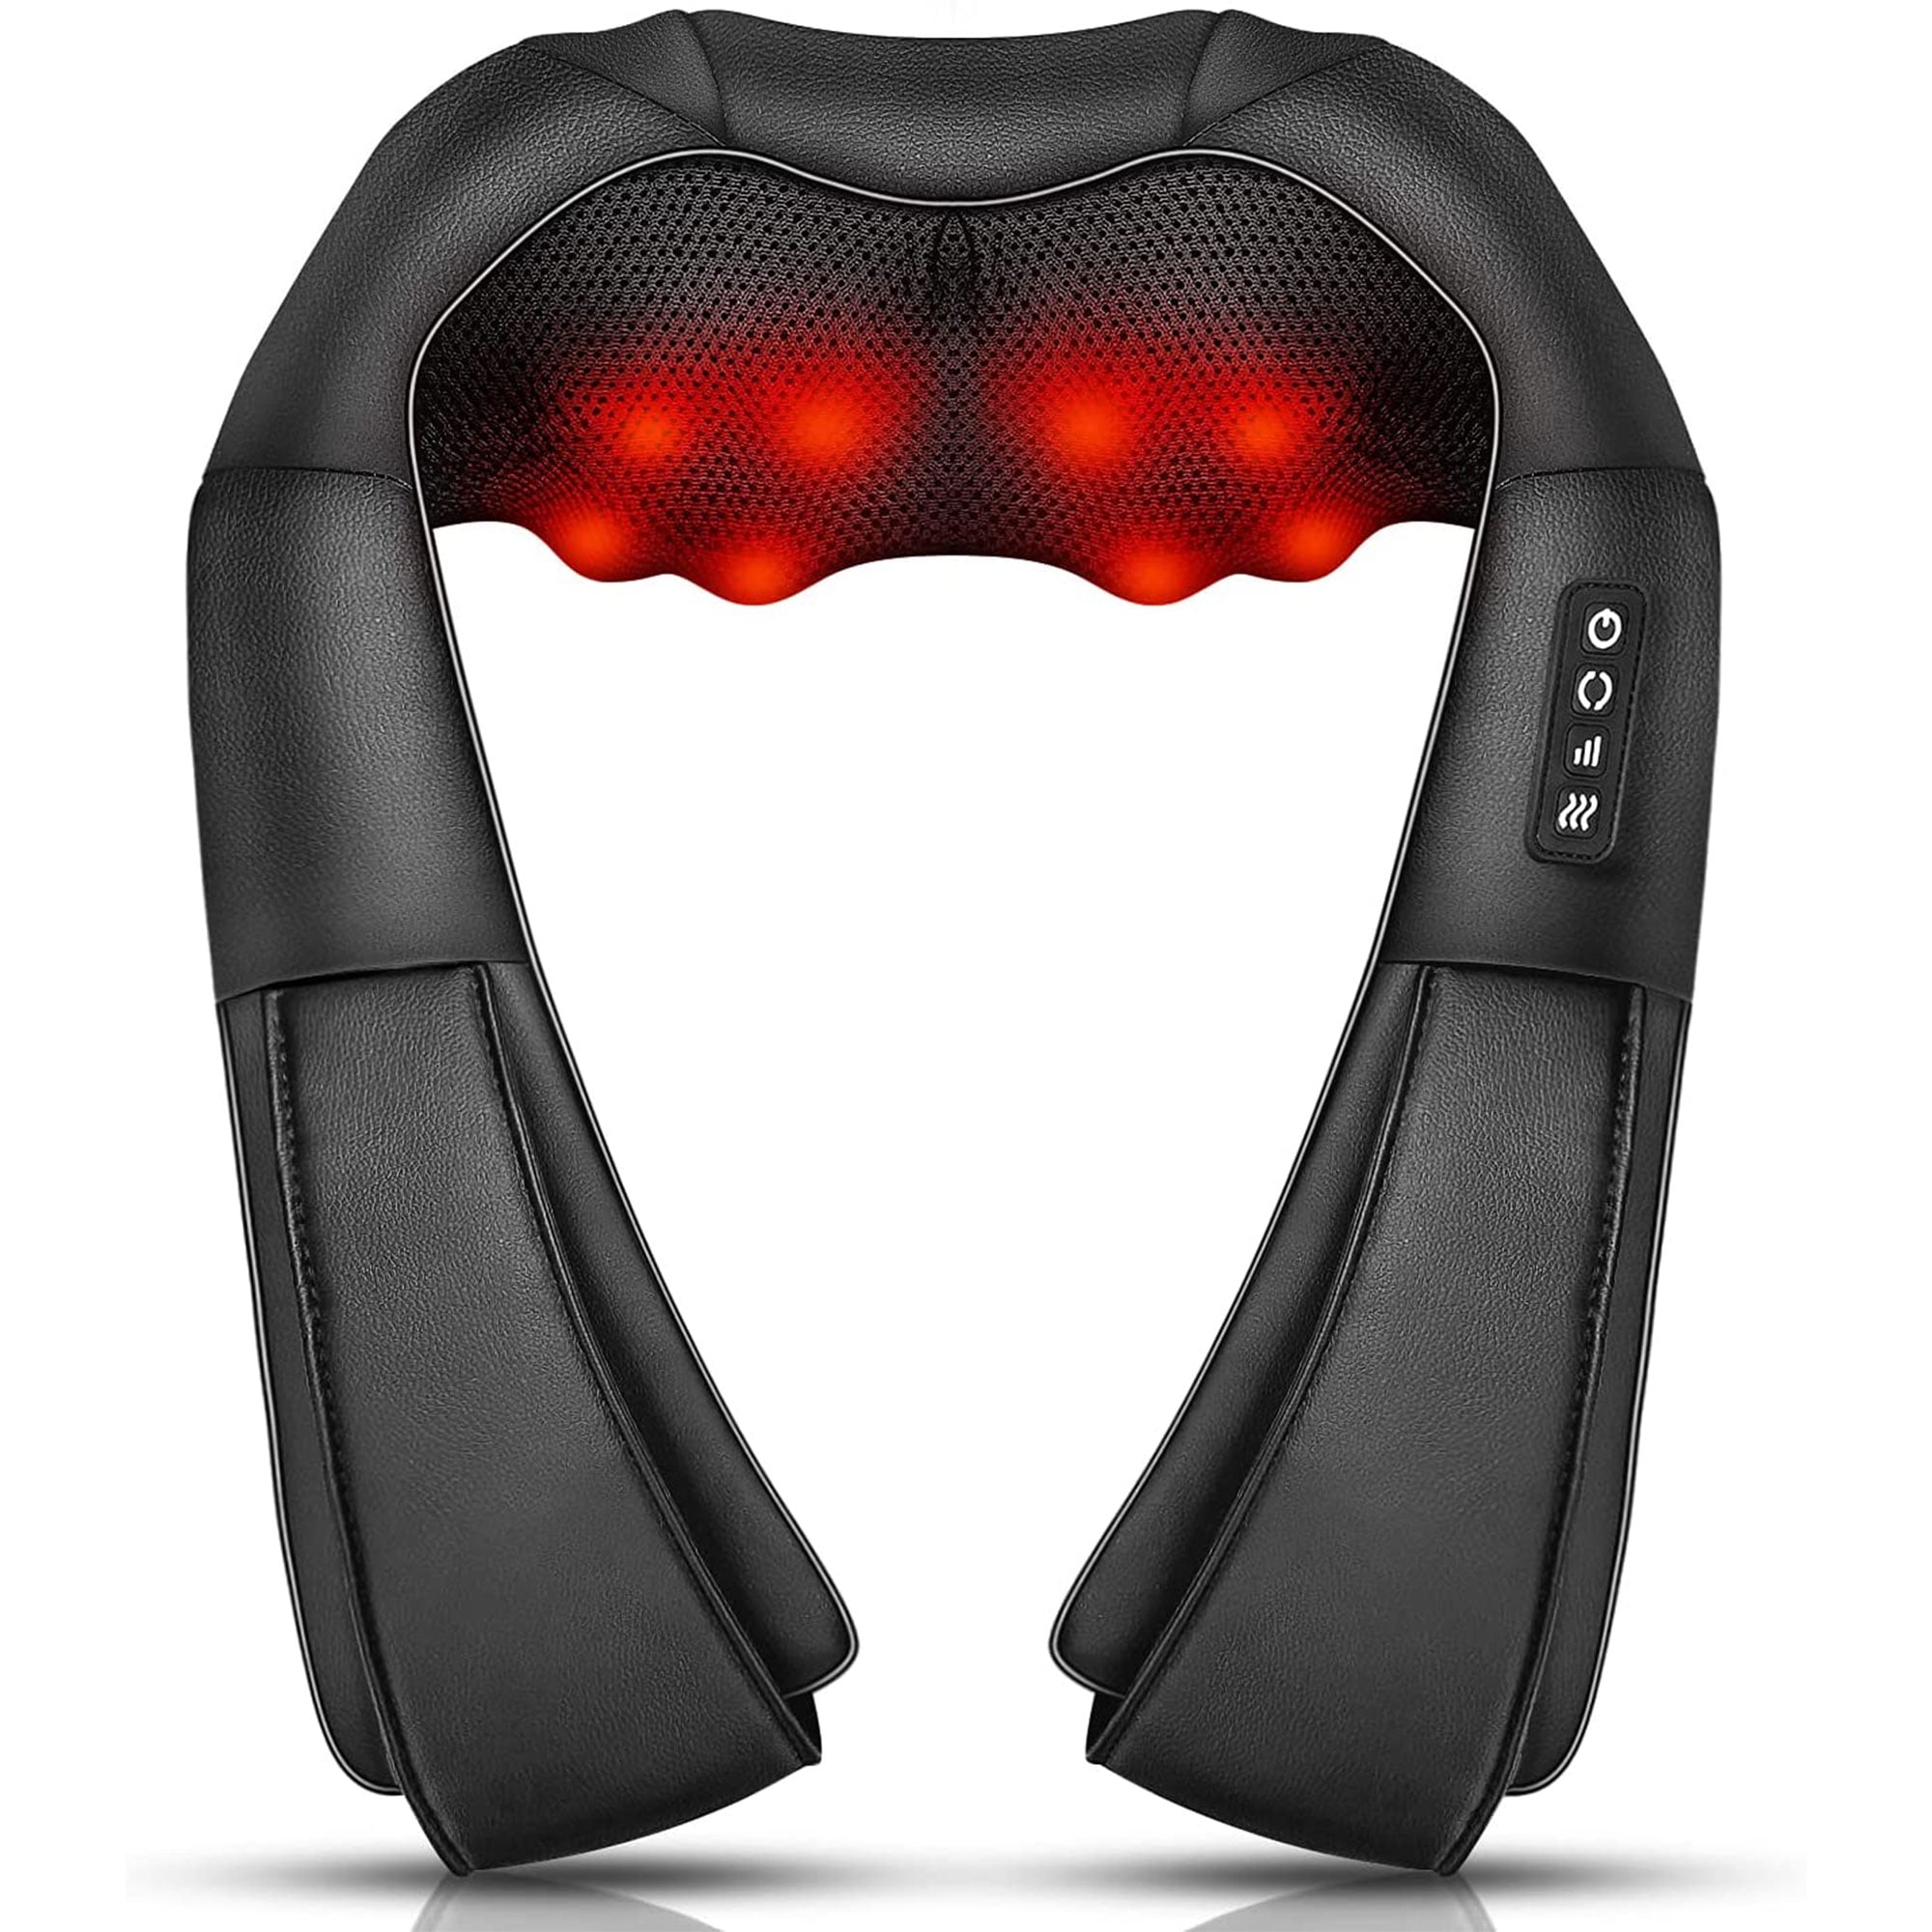 5D Shiatsu Neck and Back Massager with Soothing Heat Wireless Electric Deep  Tissue Kneading Massage Pillow Shoulder Leg Body